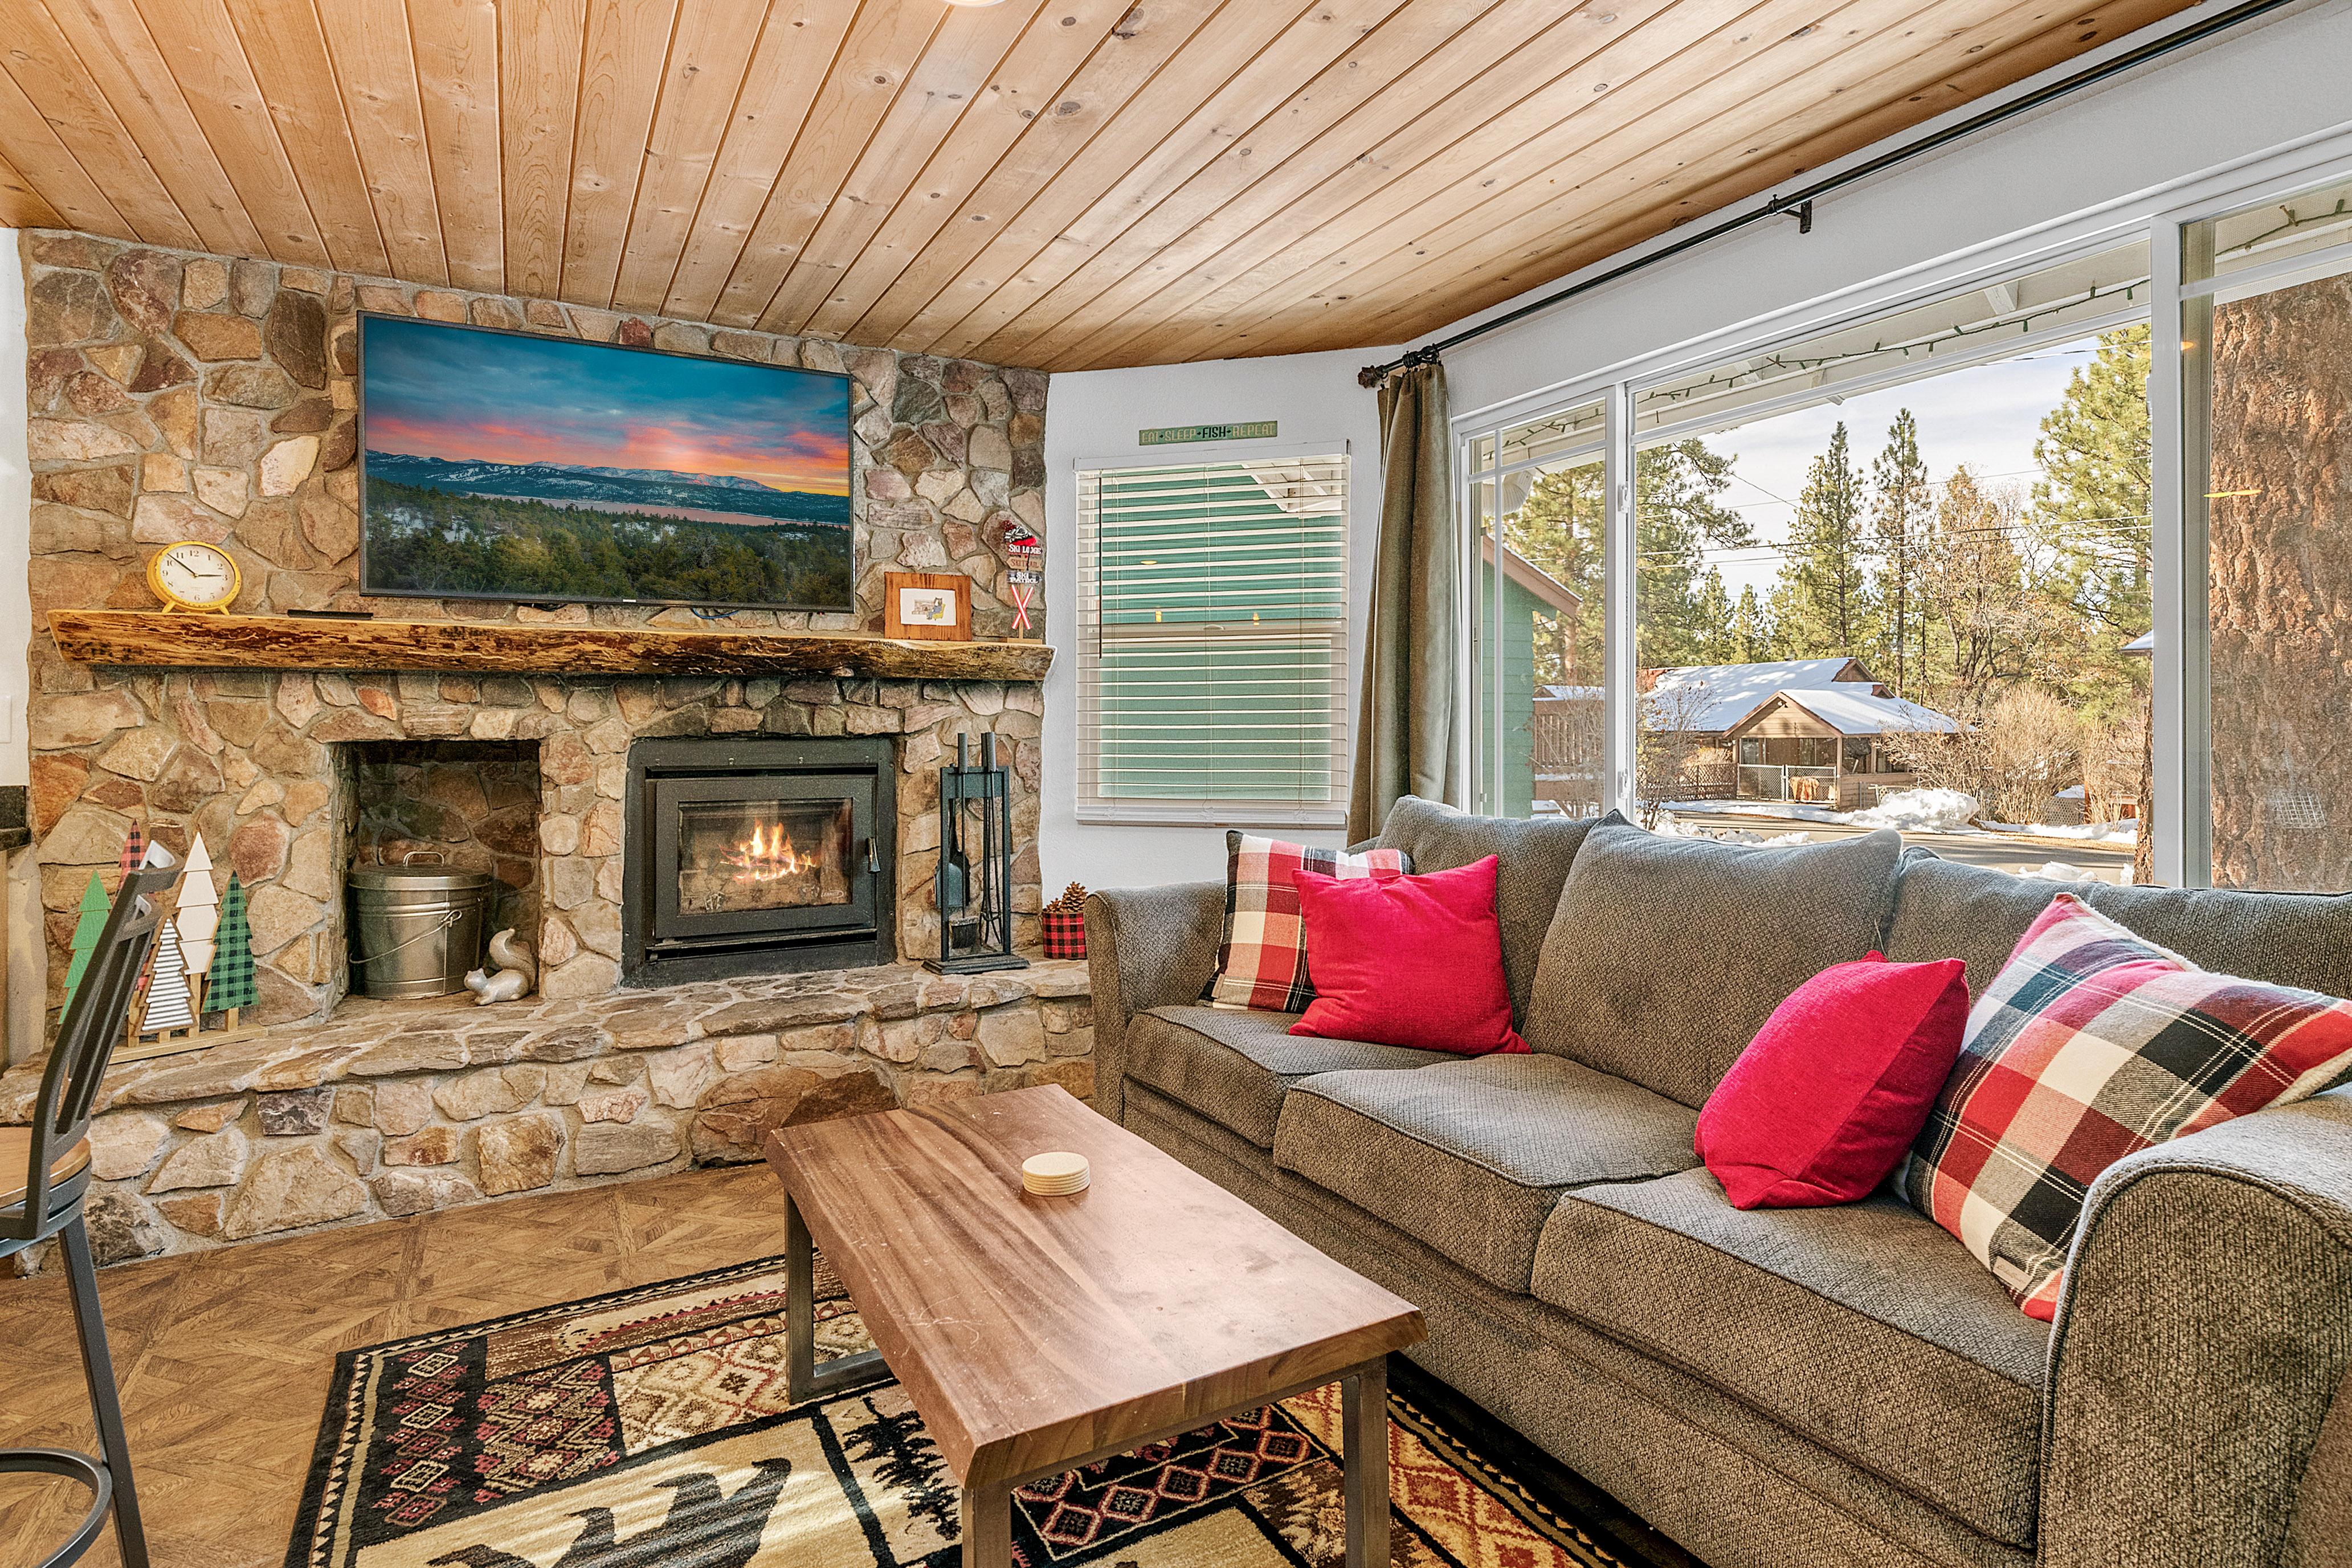 Property Image 1 - SLOPESIDE CHALET - Adorable cabin with a fire pit. NEW RENOVATIONS, adorable on the inside! Located near S